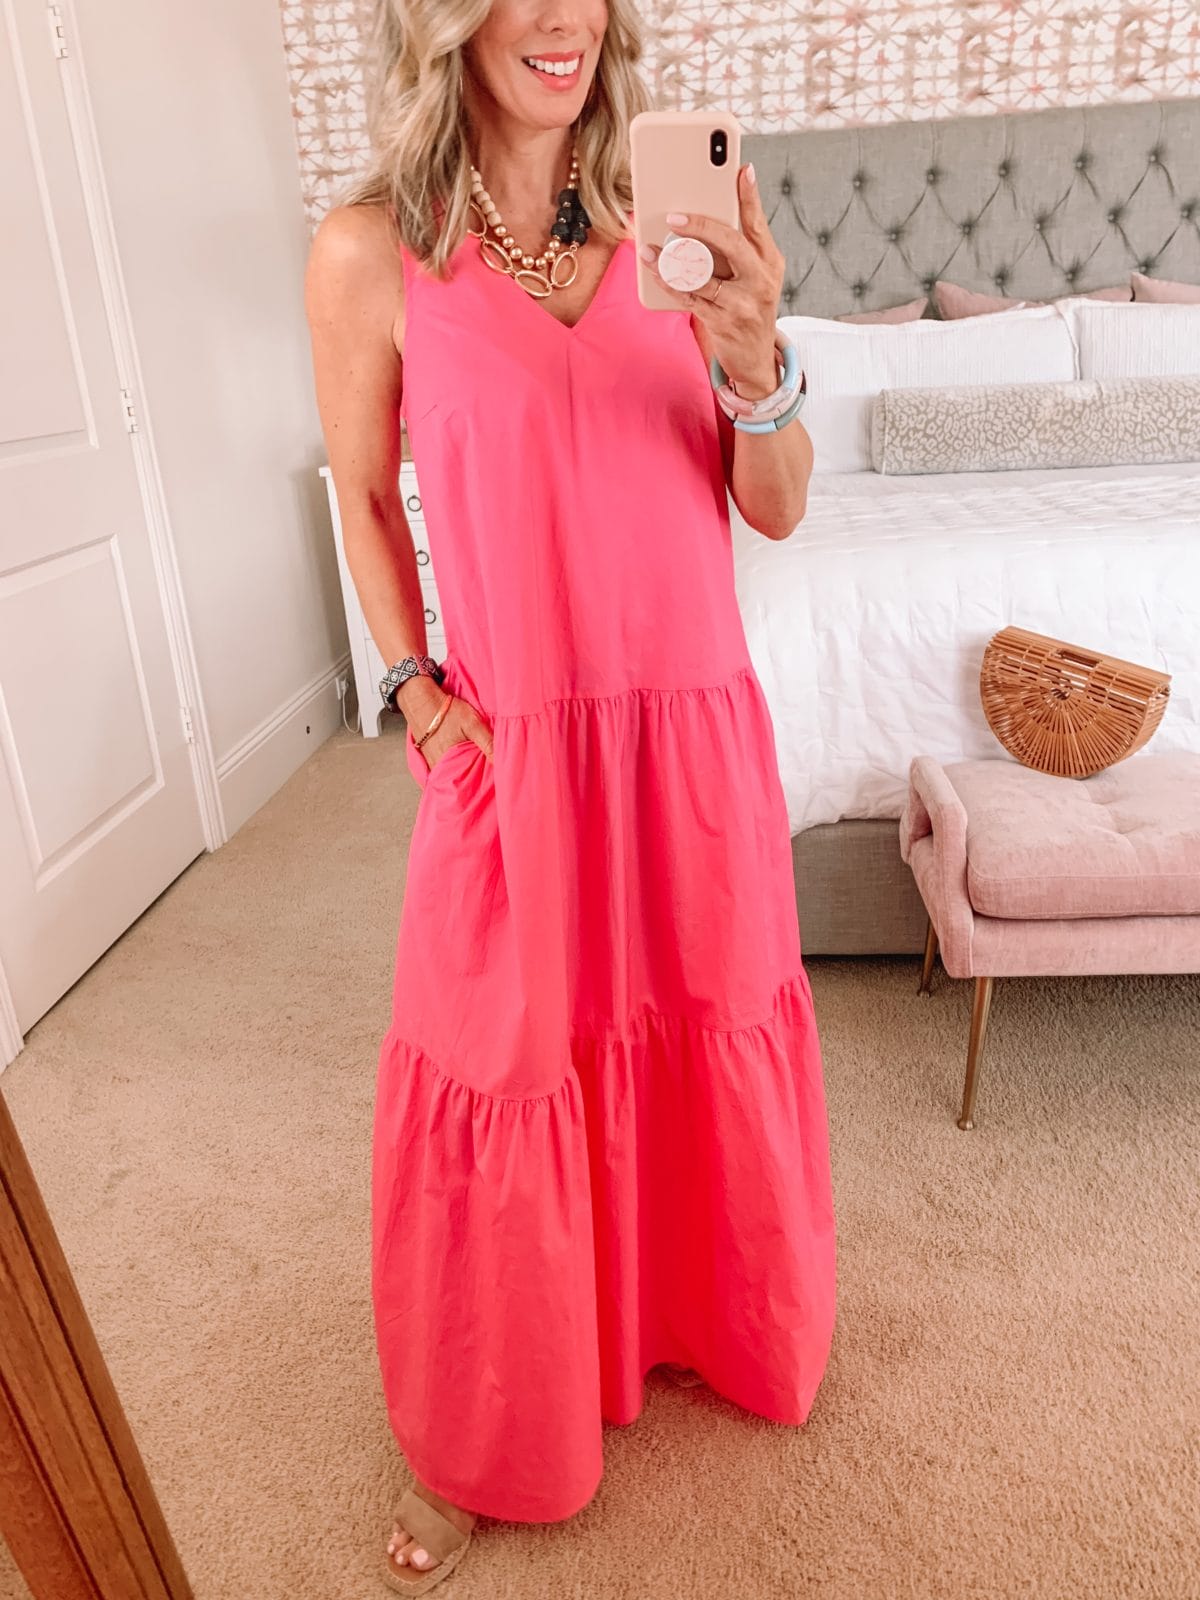 Dressing Room Finds, Target Maxi Dress and Bamboo Clutch with Wedges